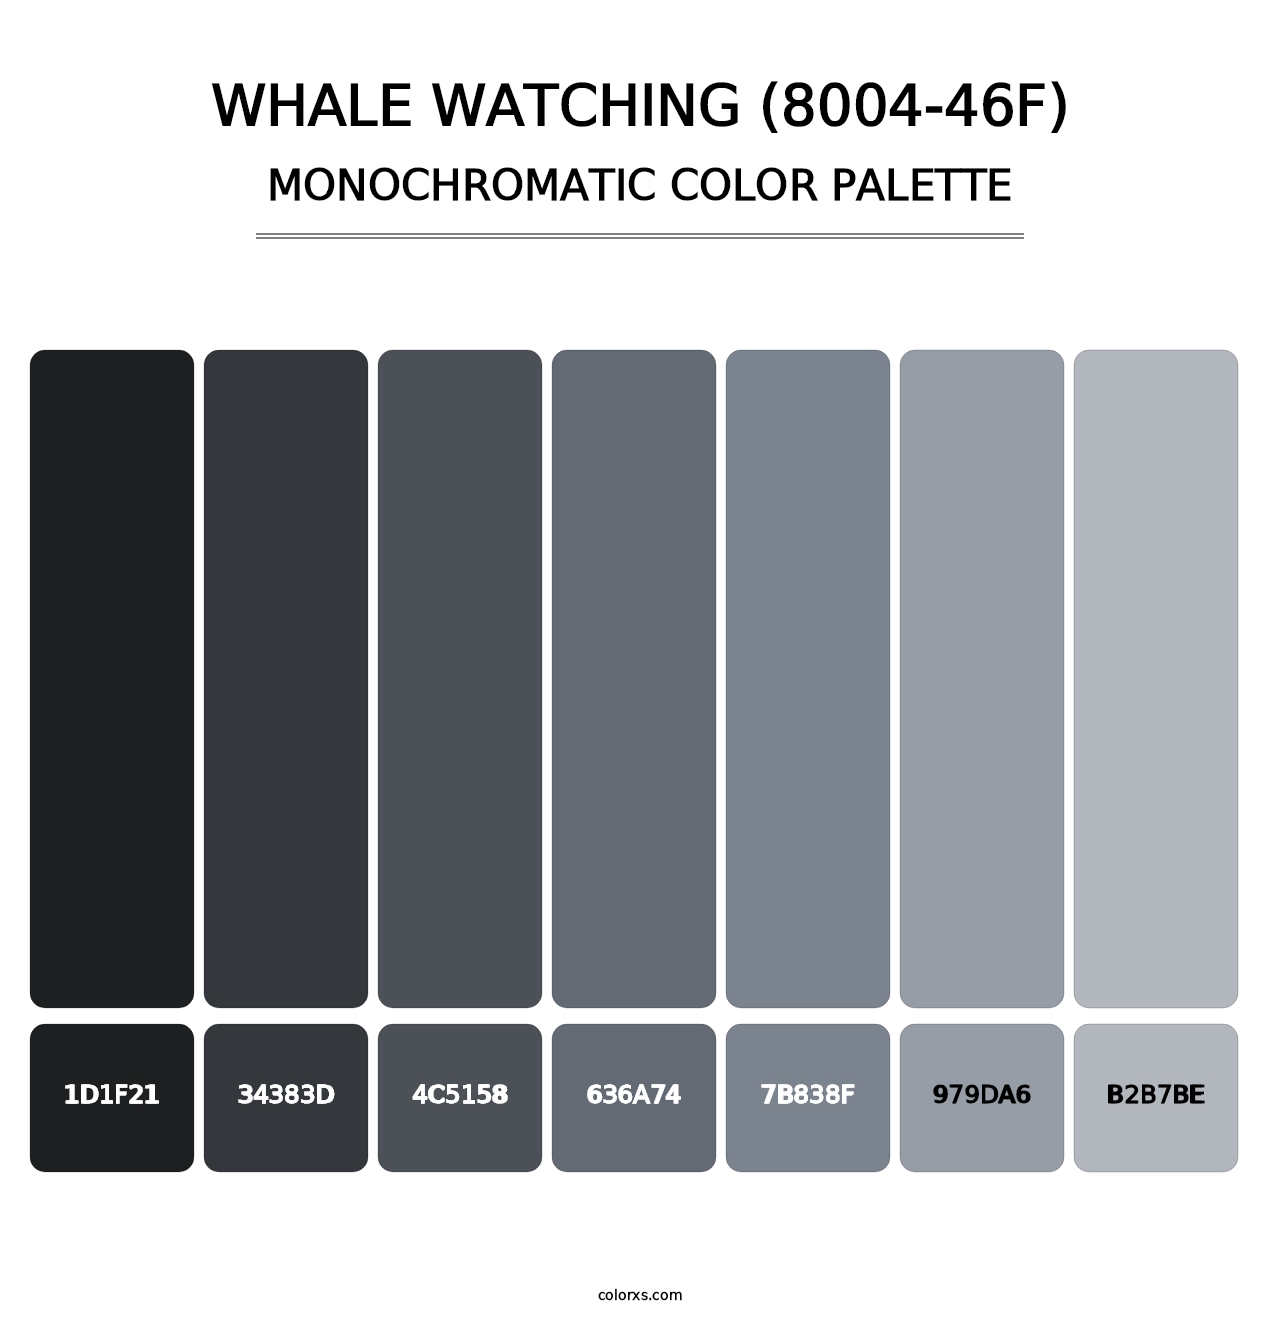 Whale Watching (8004-46F) - Monochromatic Color Palette